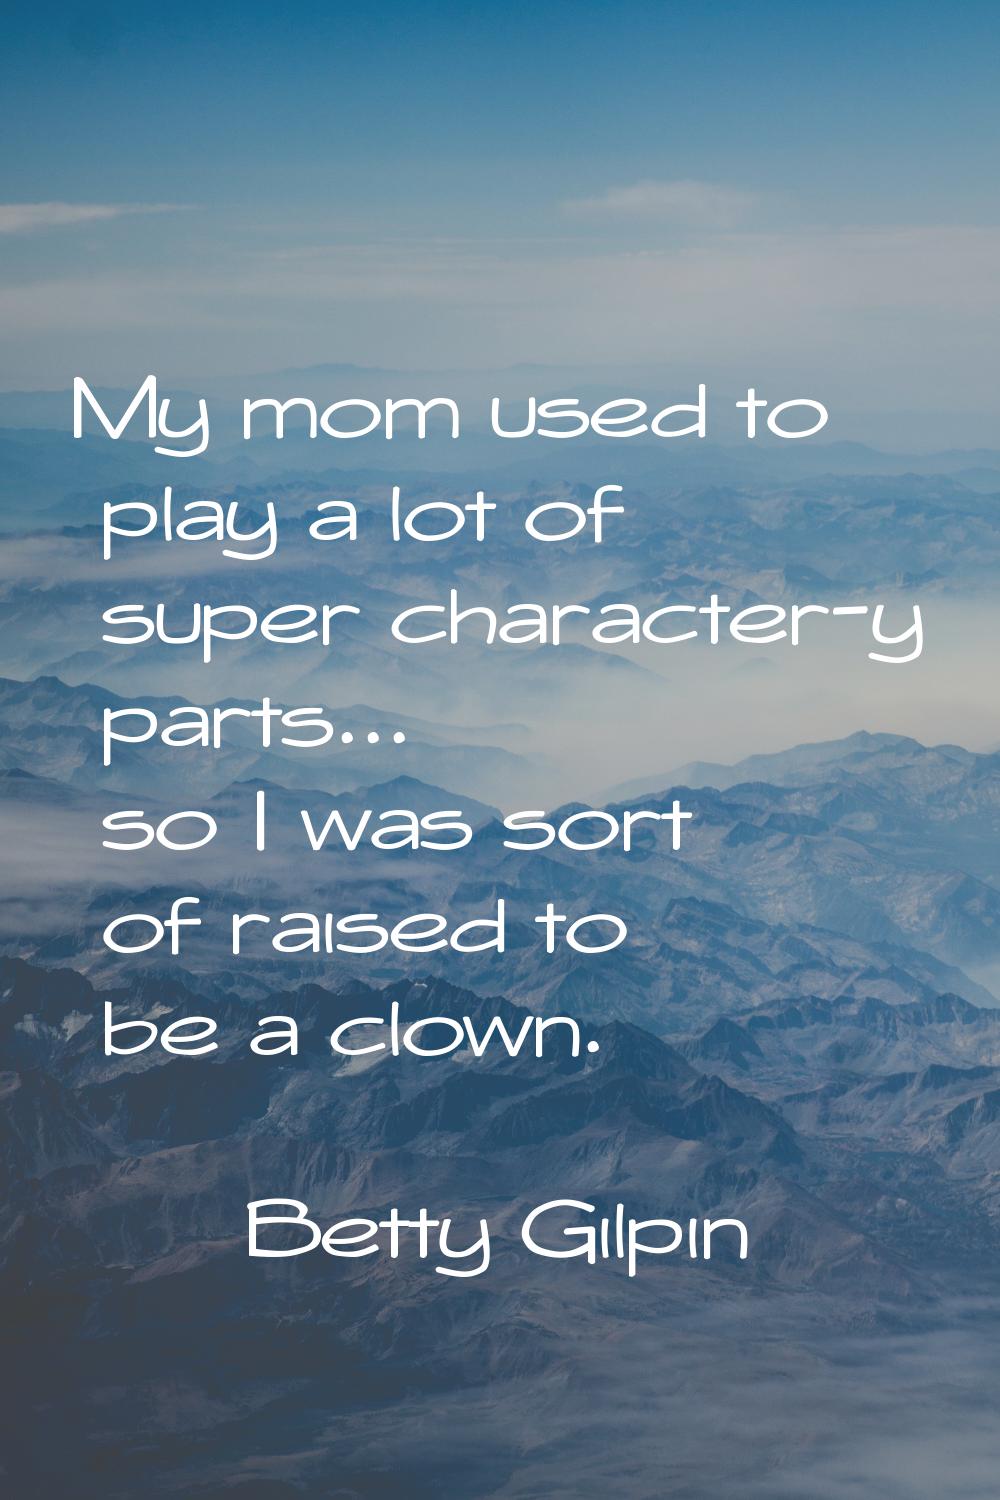 My mom used to play a lot of super character-y parts... so I was sort of raised to be a clown.